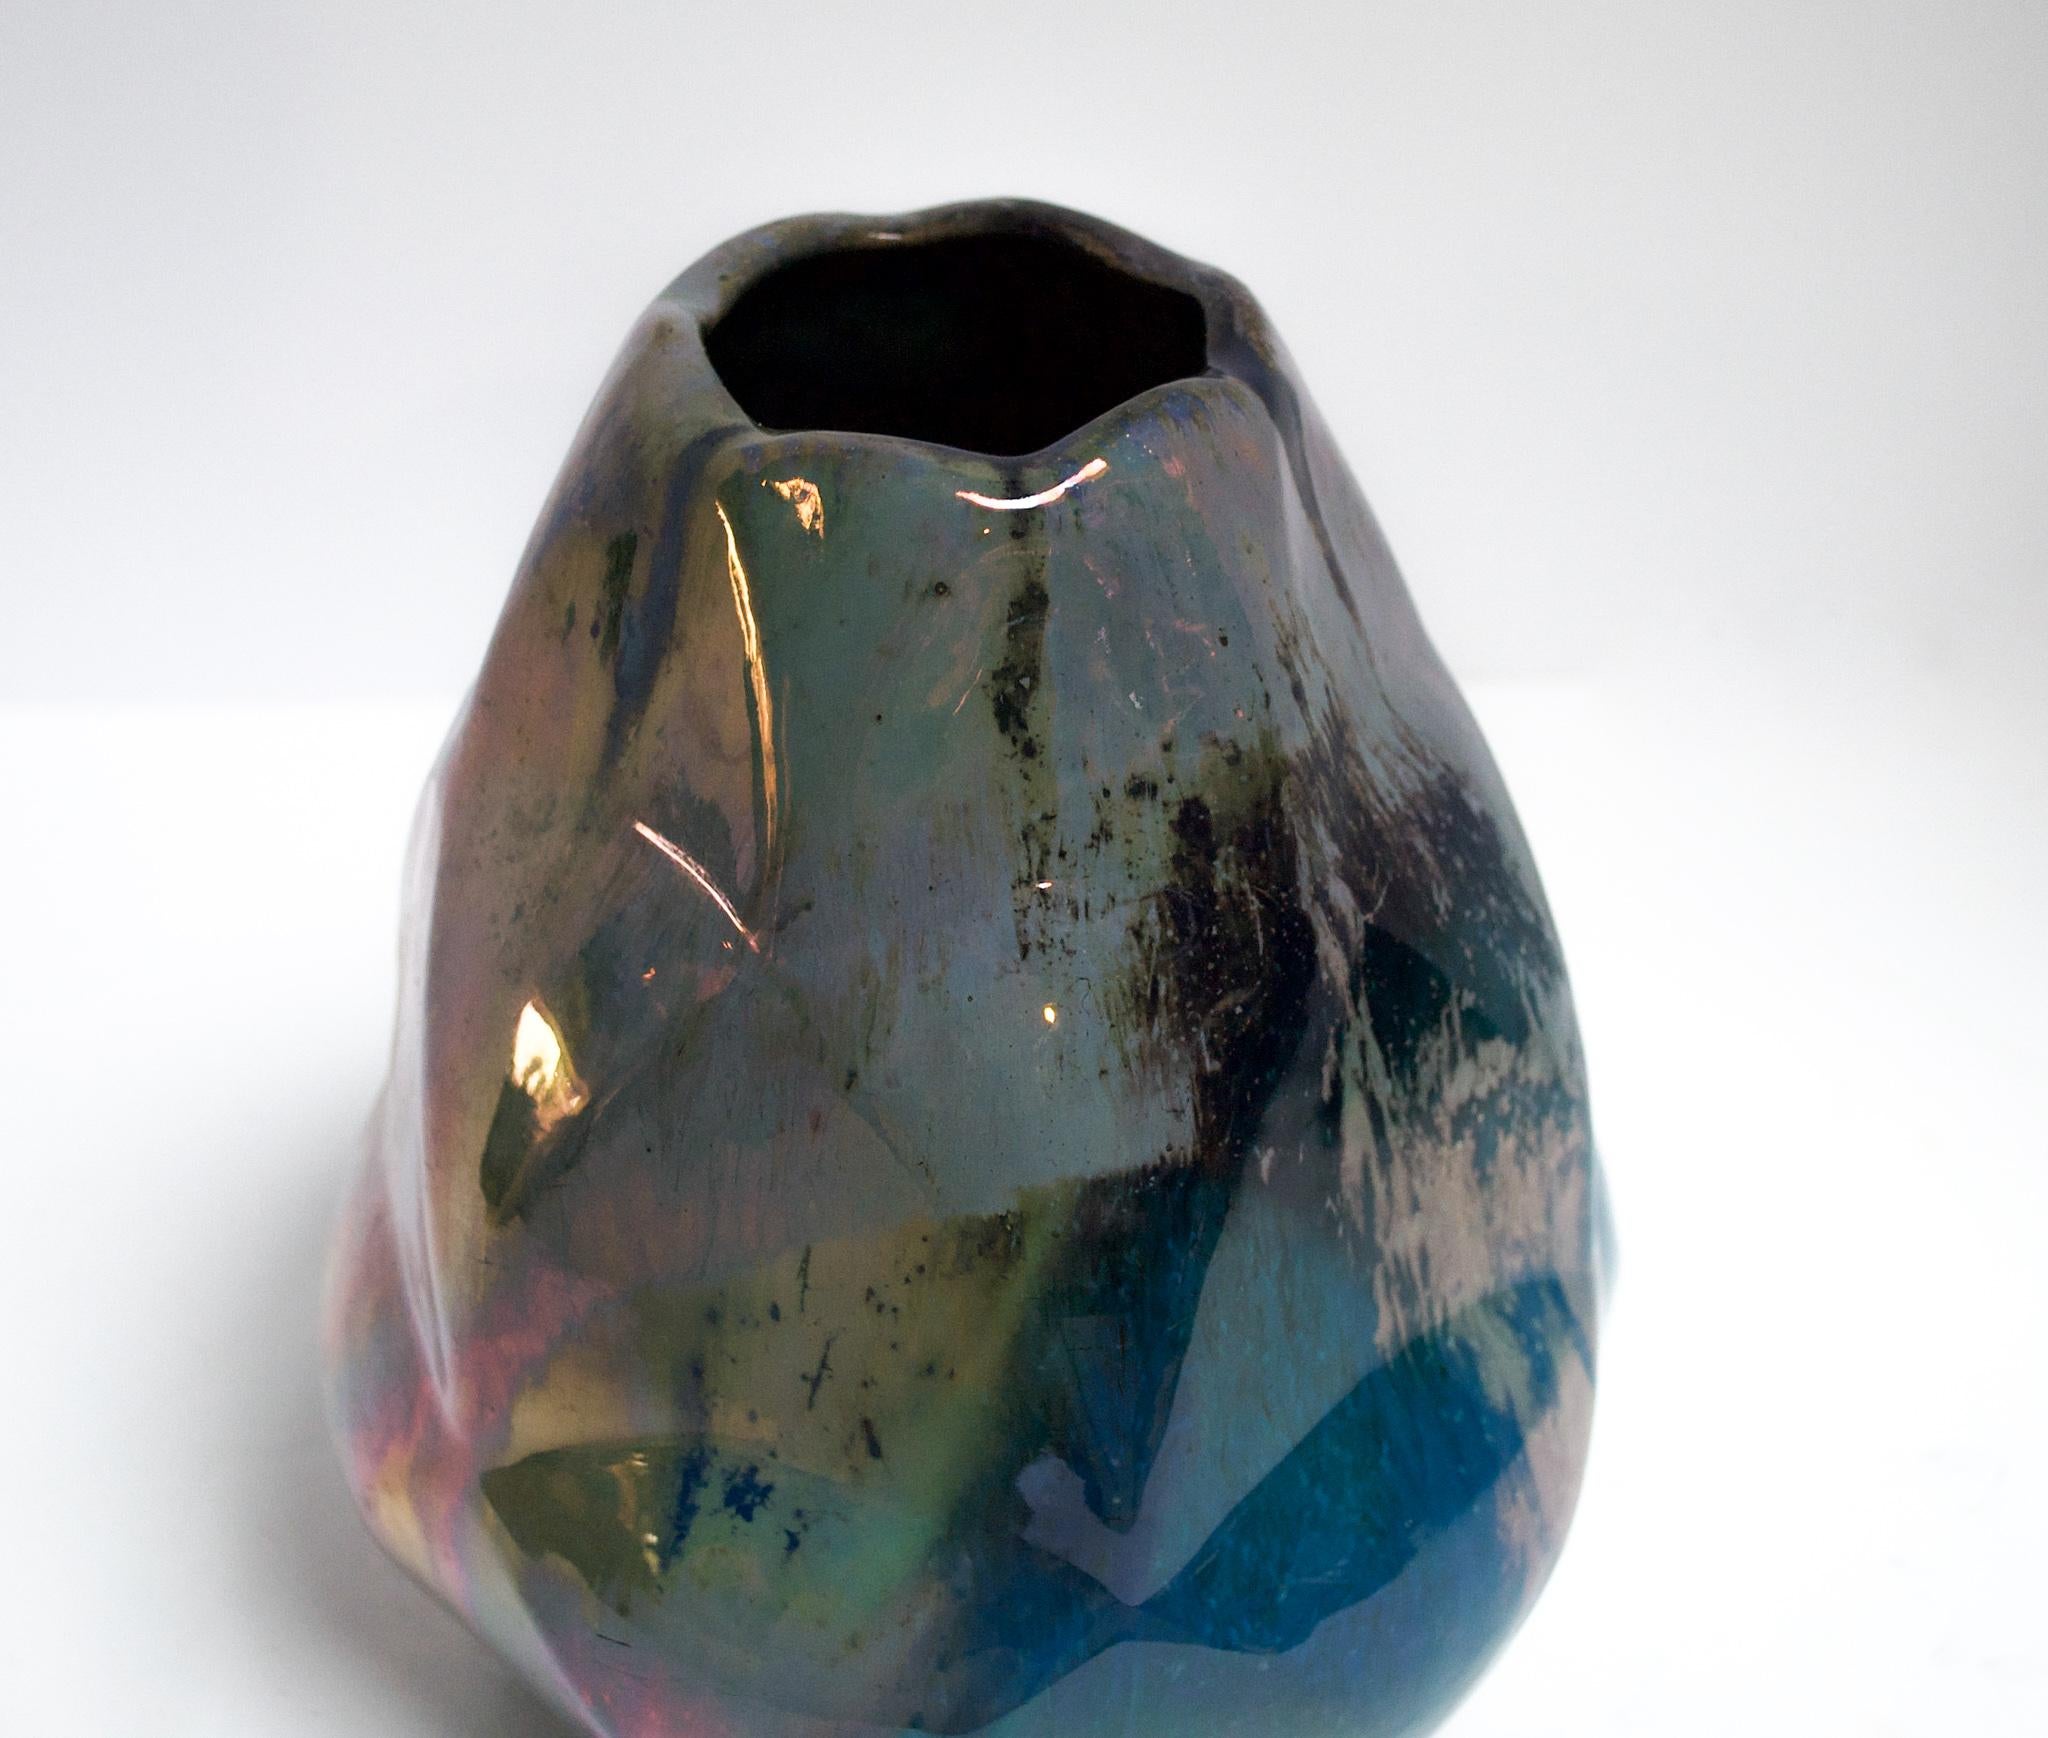 Alphonse Cytere took the world by storm in 1903 when he opened his studio in Rambervillers, France. It was here near the artistic center of Nancy that Cytere began creating ceramics with unique metallic, iridescent glazes. This beautifully crafted